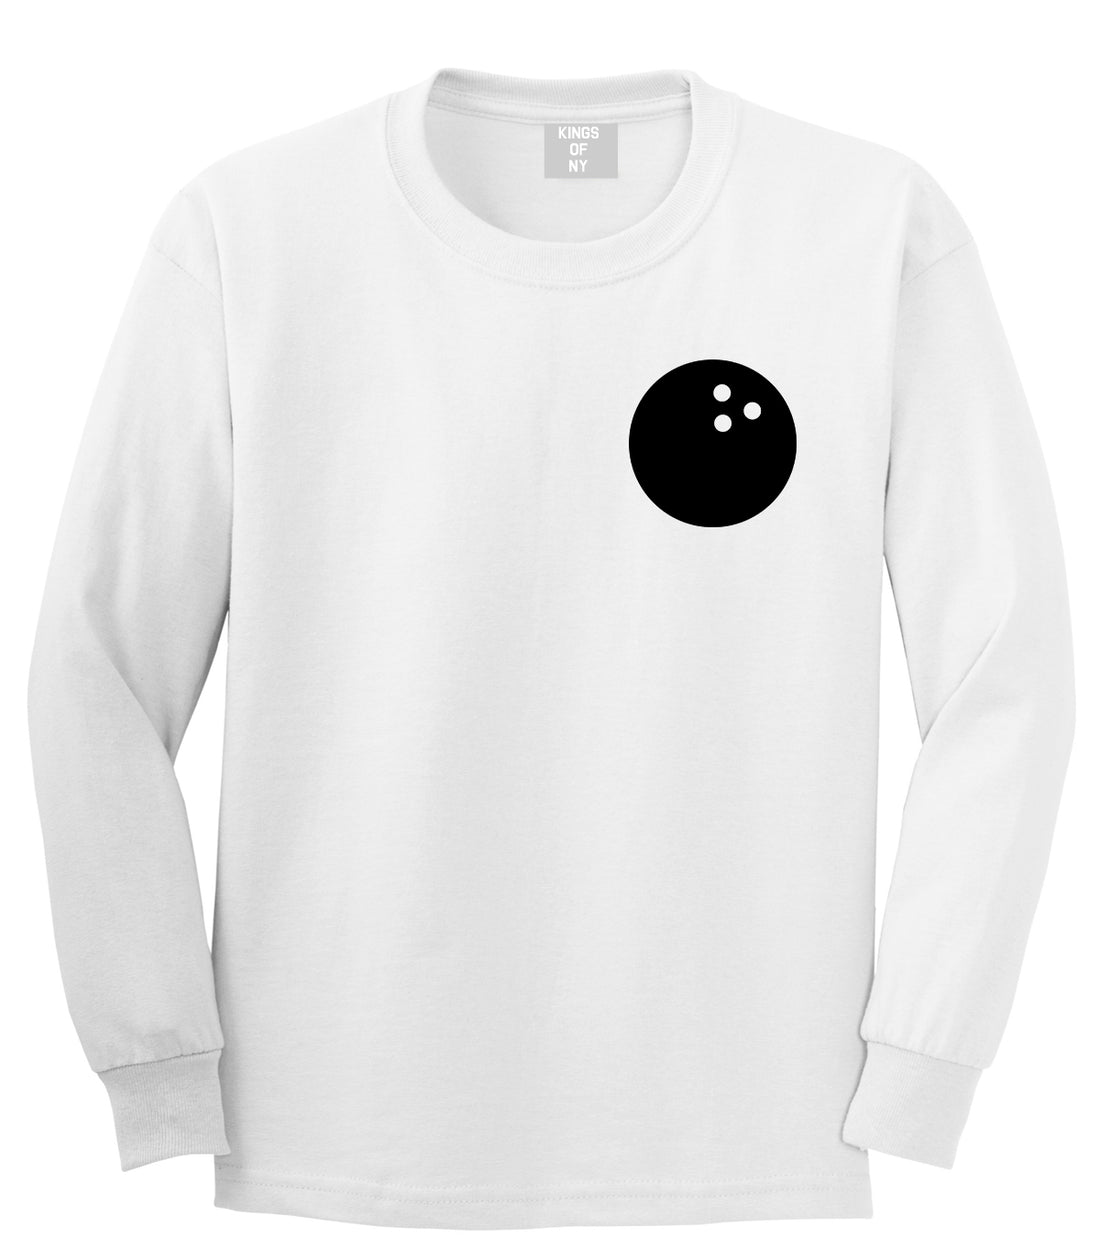 Bowling Ball Chest White Long Sleeve T-Shirt by Kings Of NY